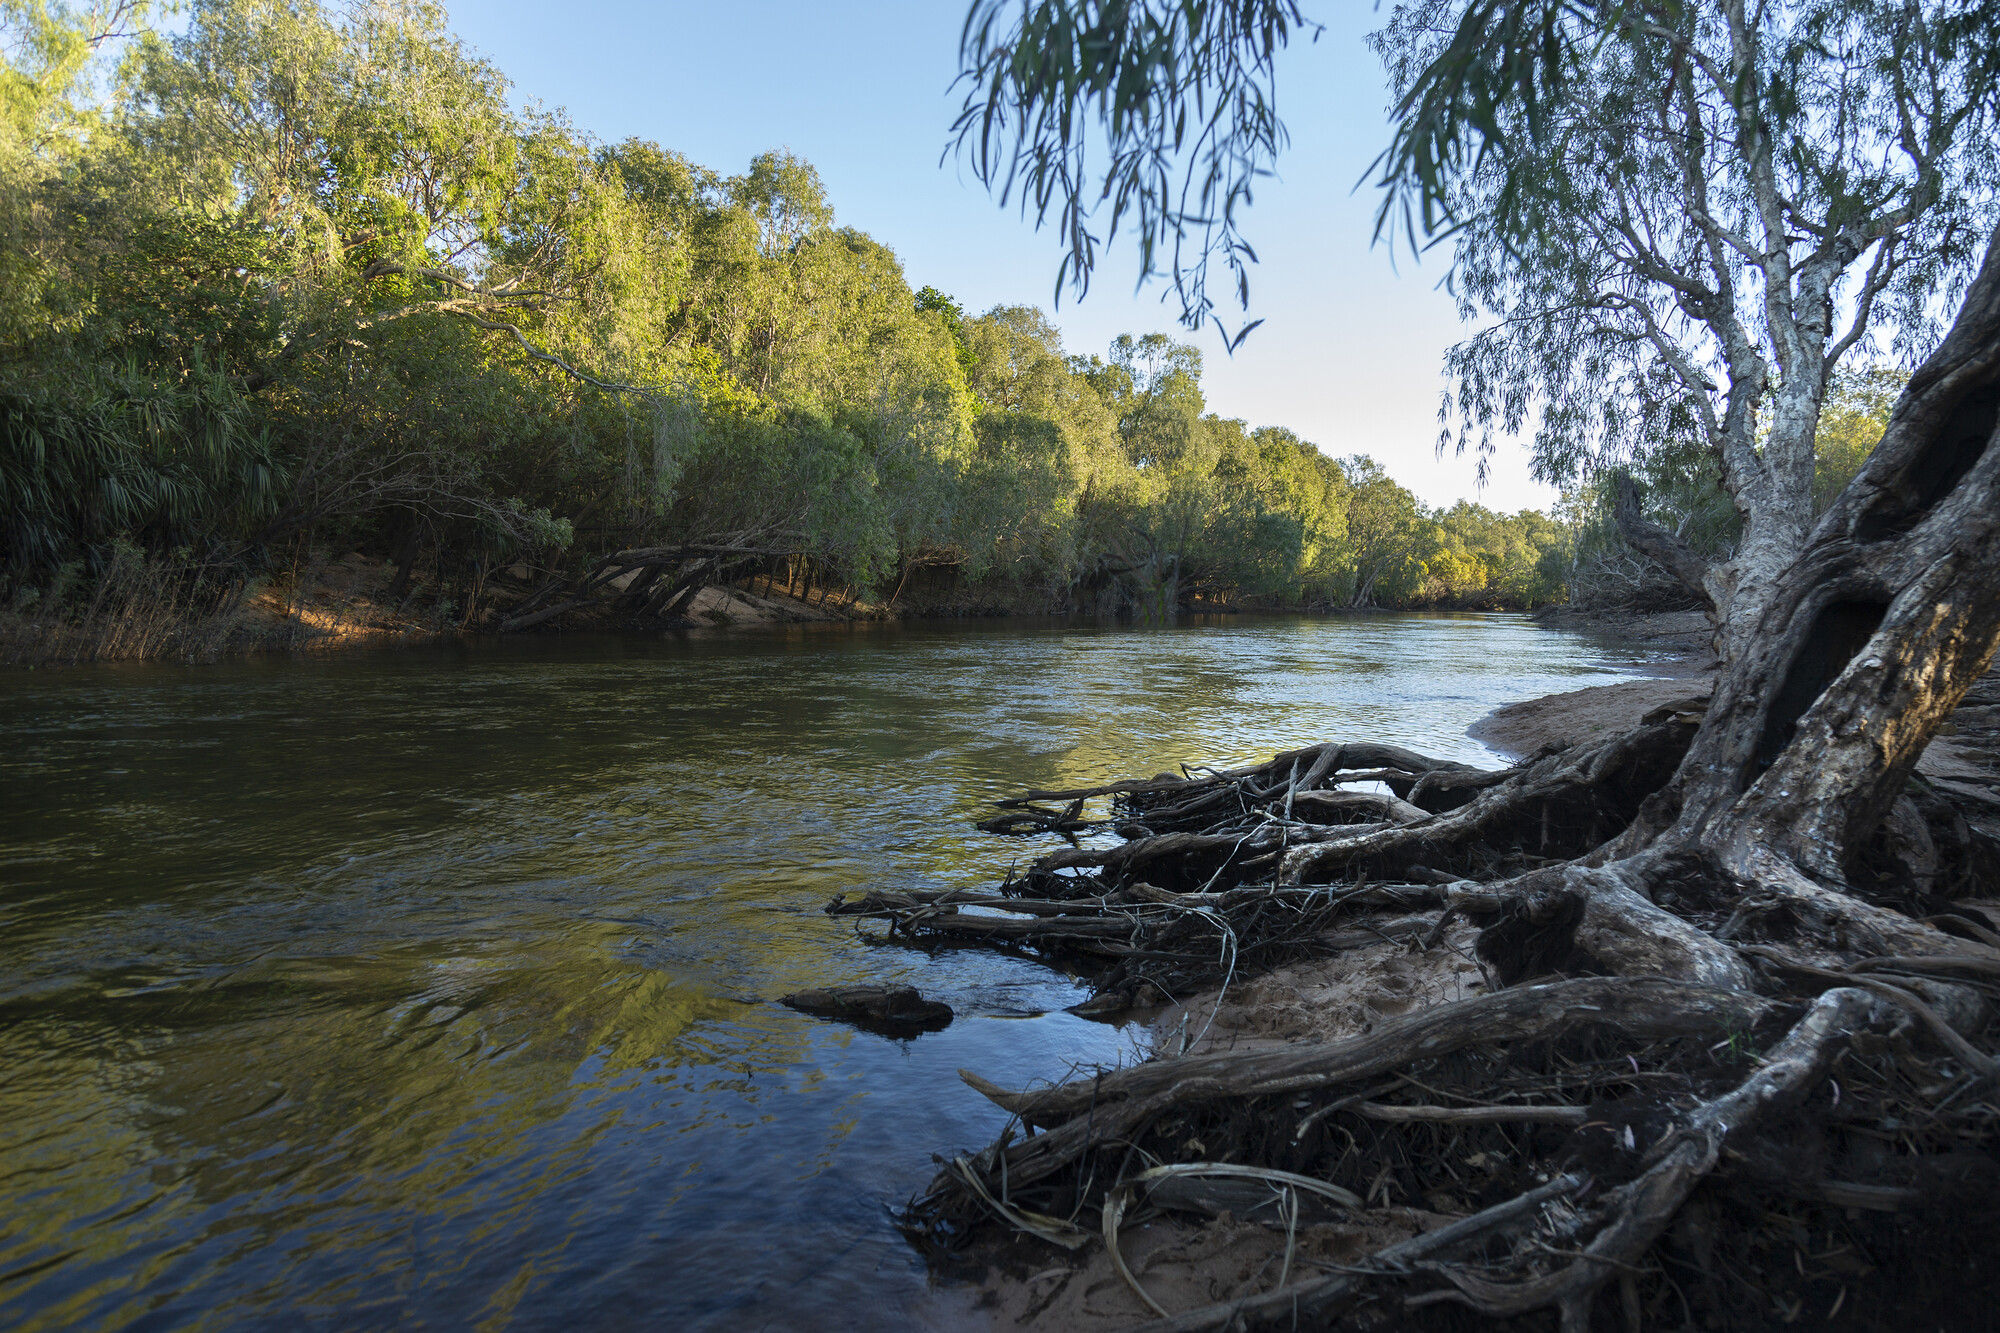 Water scientists raise concerns over NT water laws